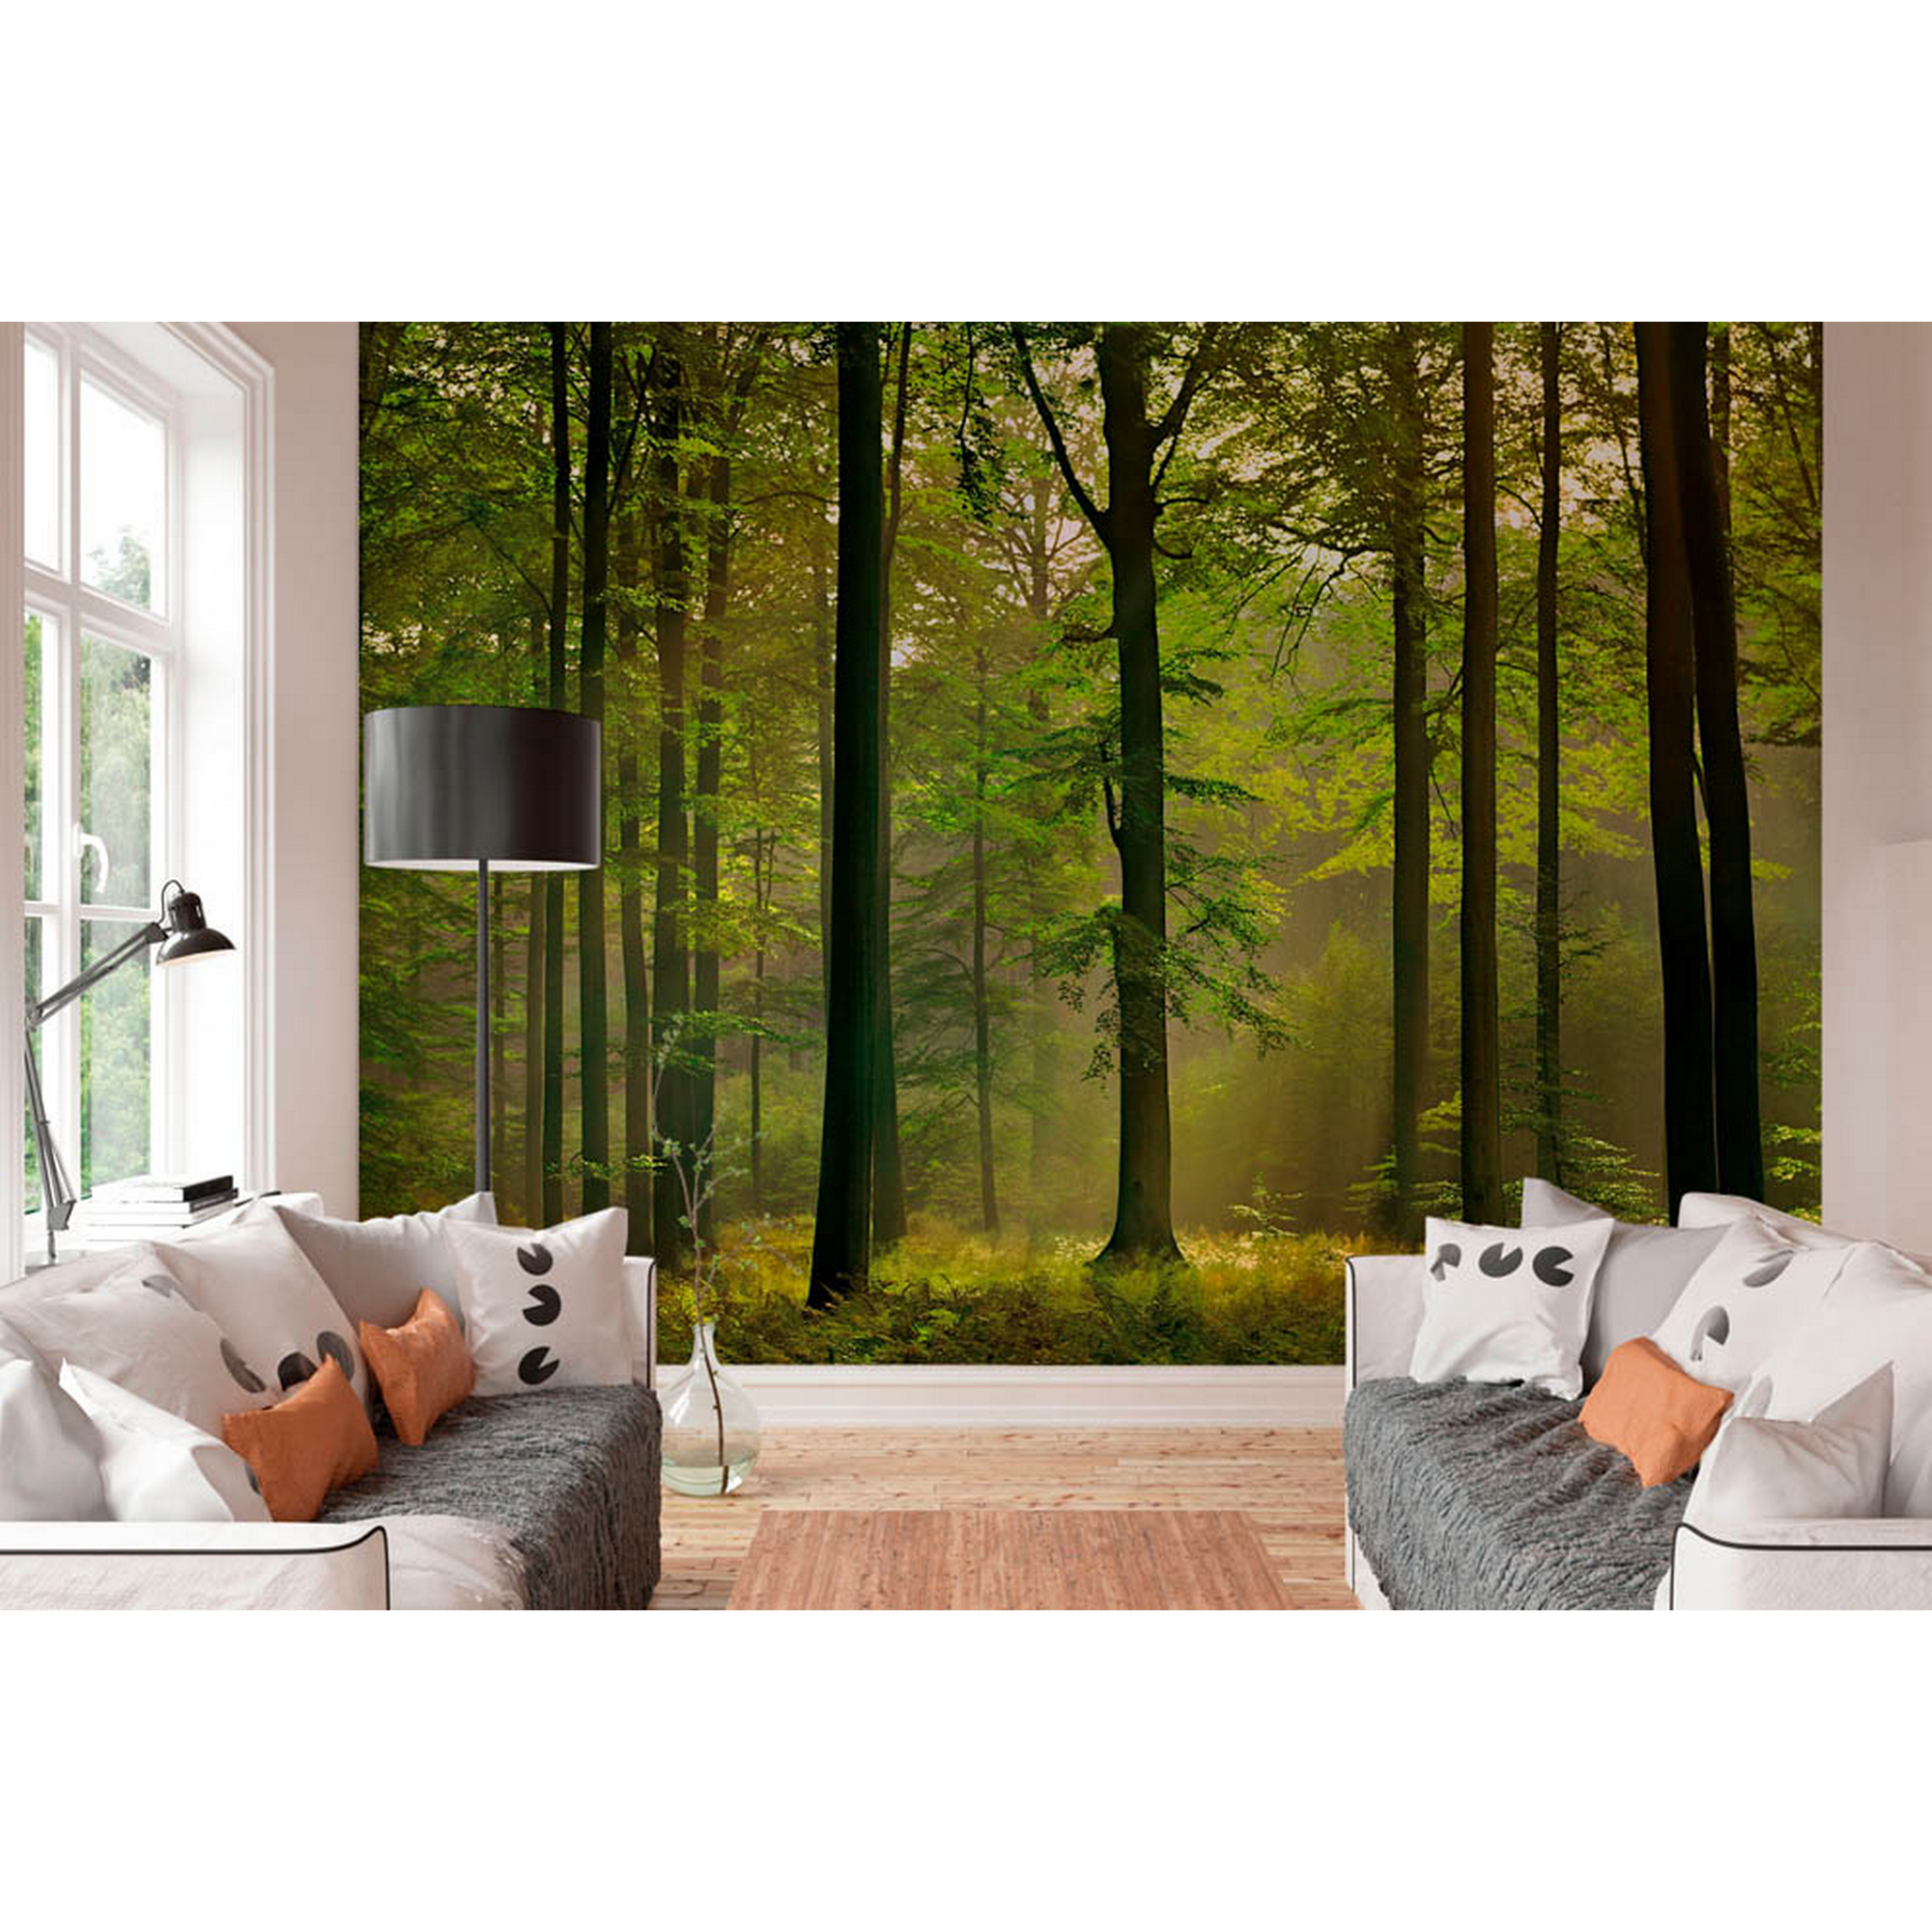 Reinders Fototapete 'Herbst im Wald' 366 x 254 cm + product picture